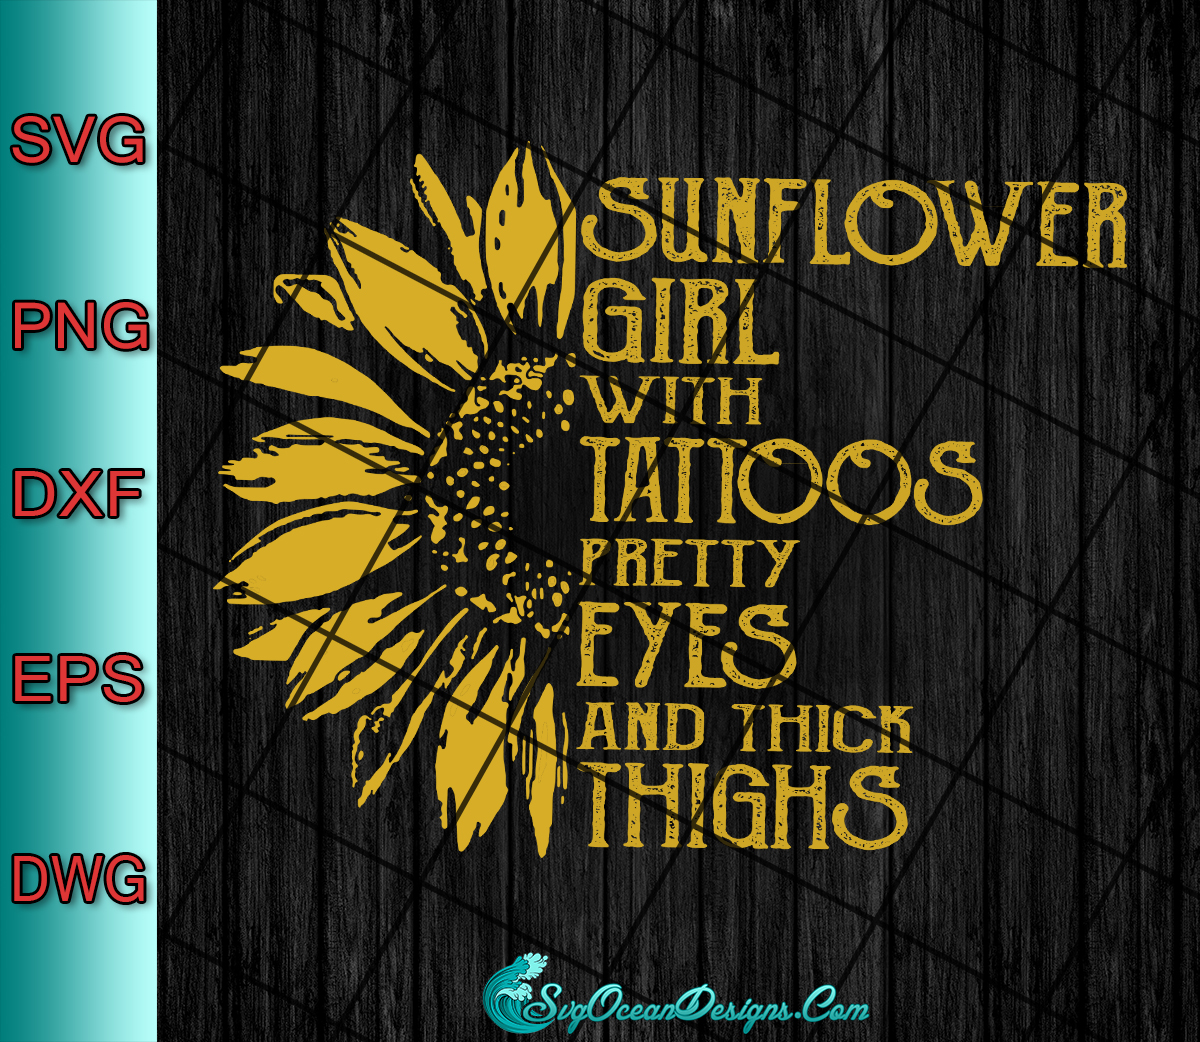 Download Sunflower Girl With Tattoos Pretty Eyes And Thick Thighs Svg Png Dxf Eps Digital Download ...